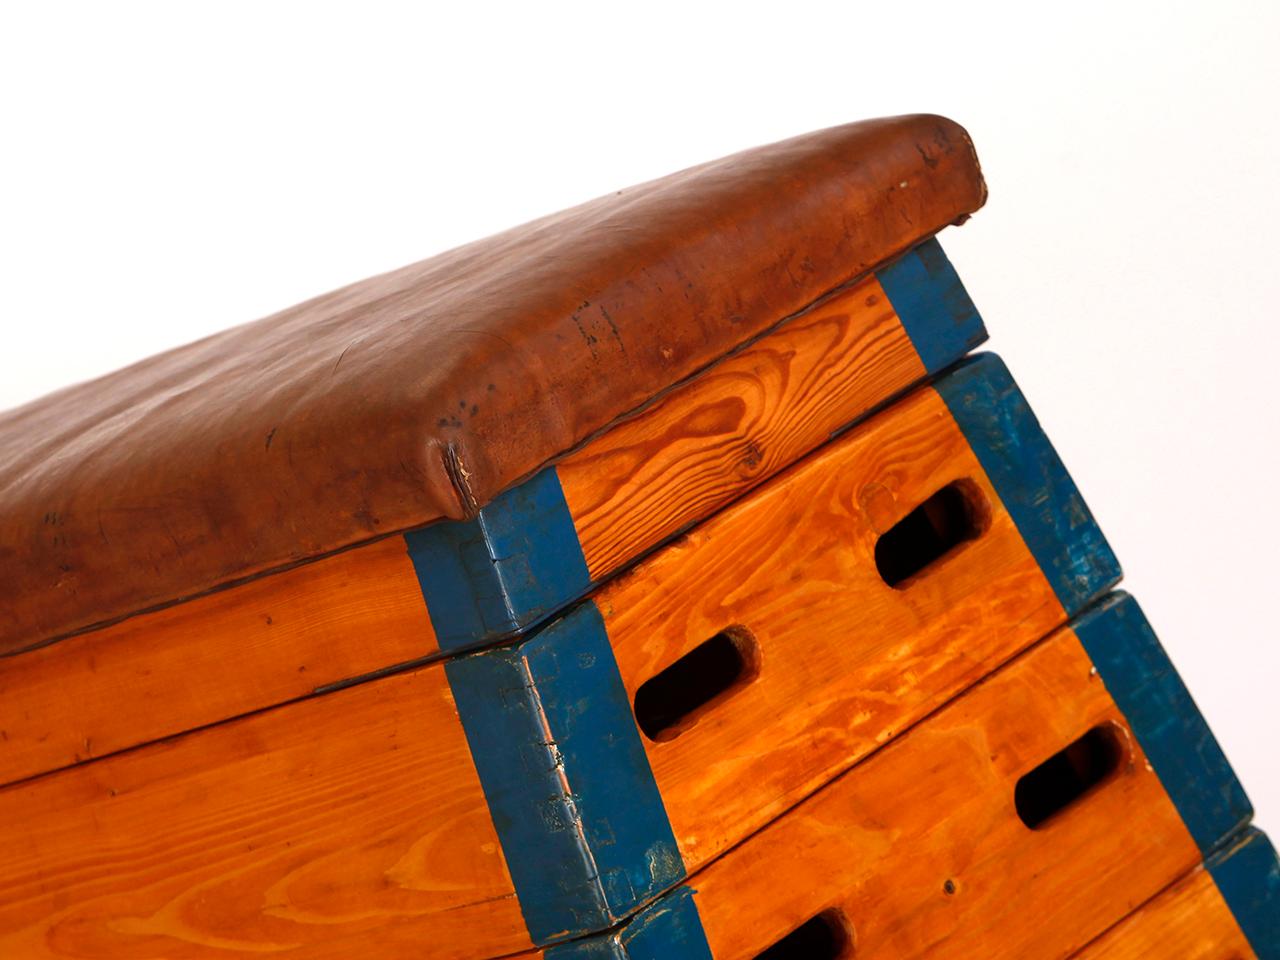 Czech Vintage Leather Gymnastic Bench Box, 1940s, Restored For Sale